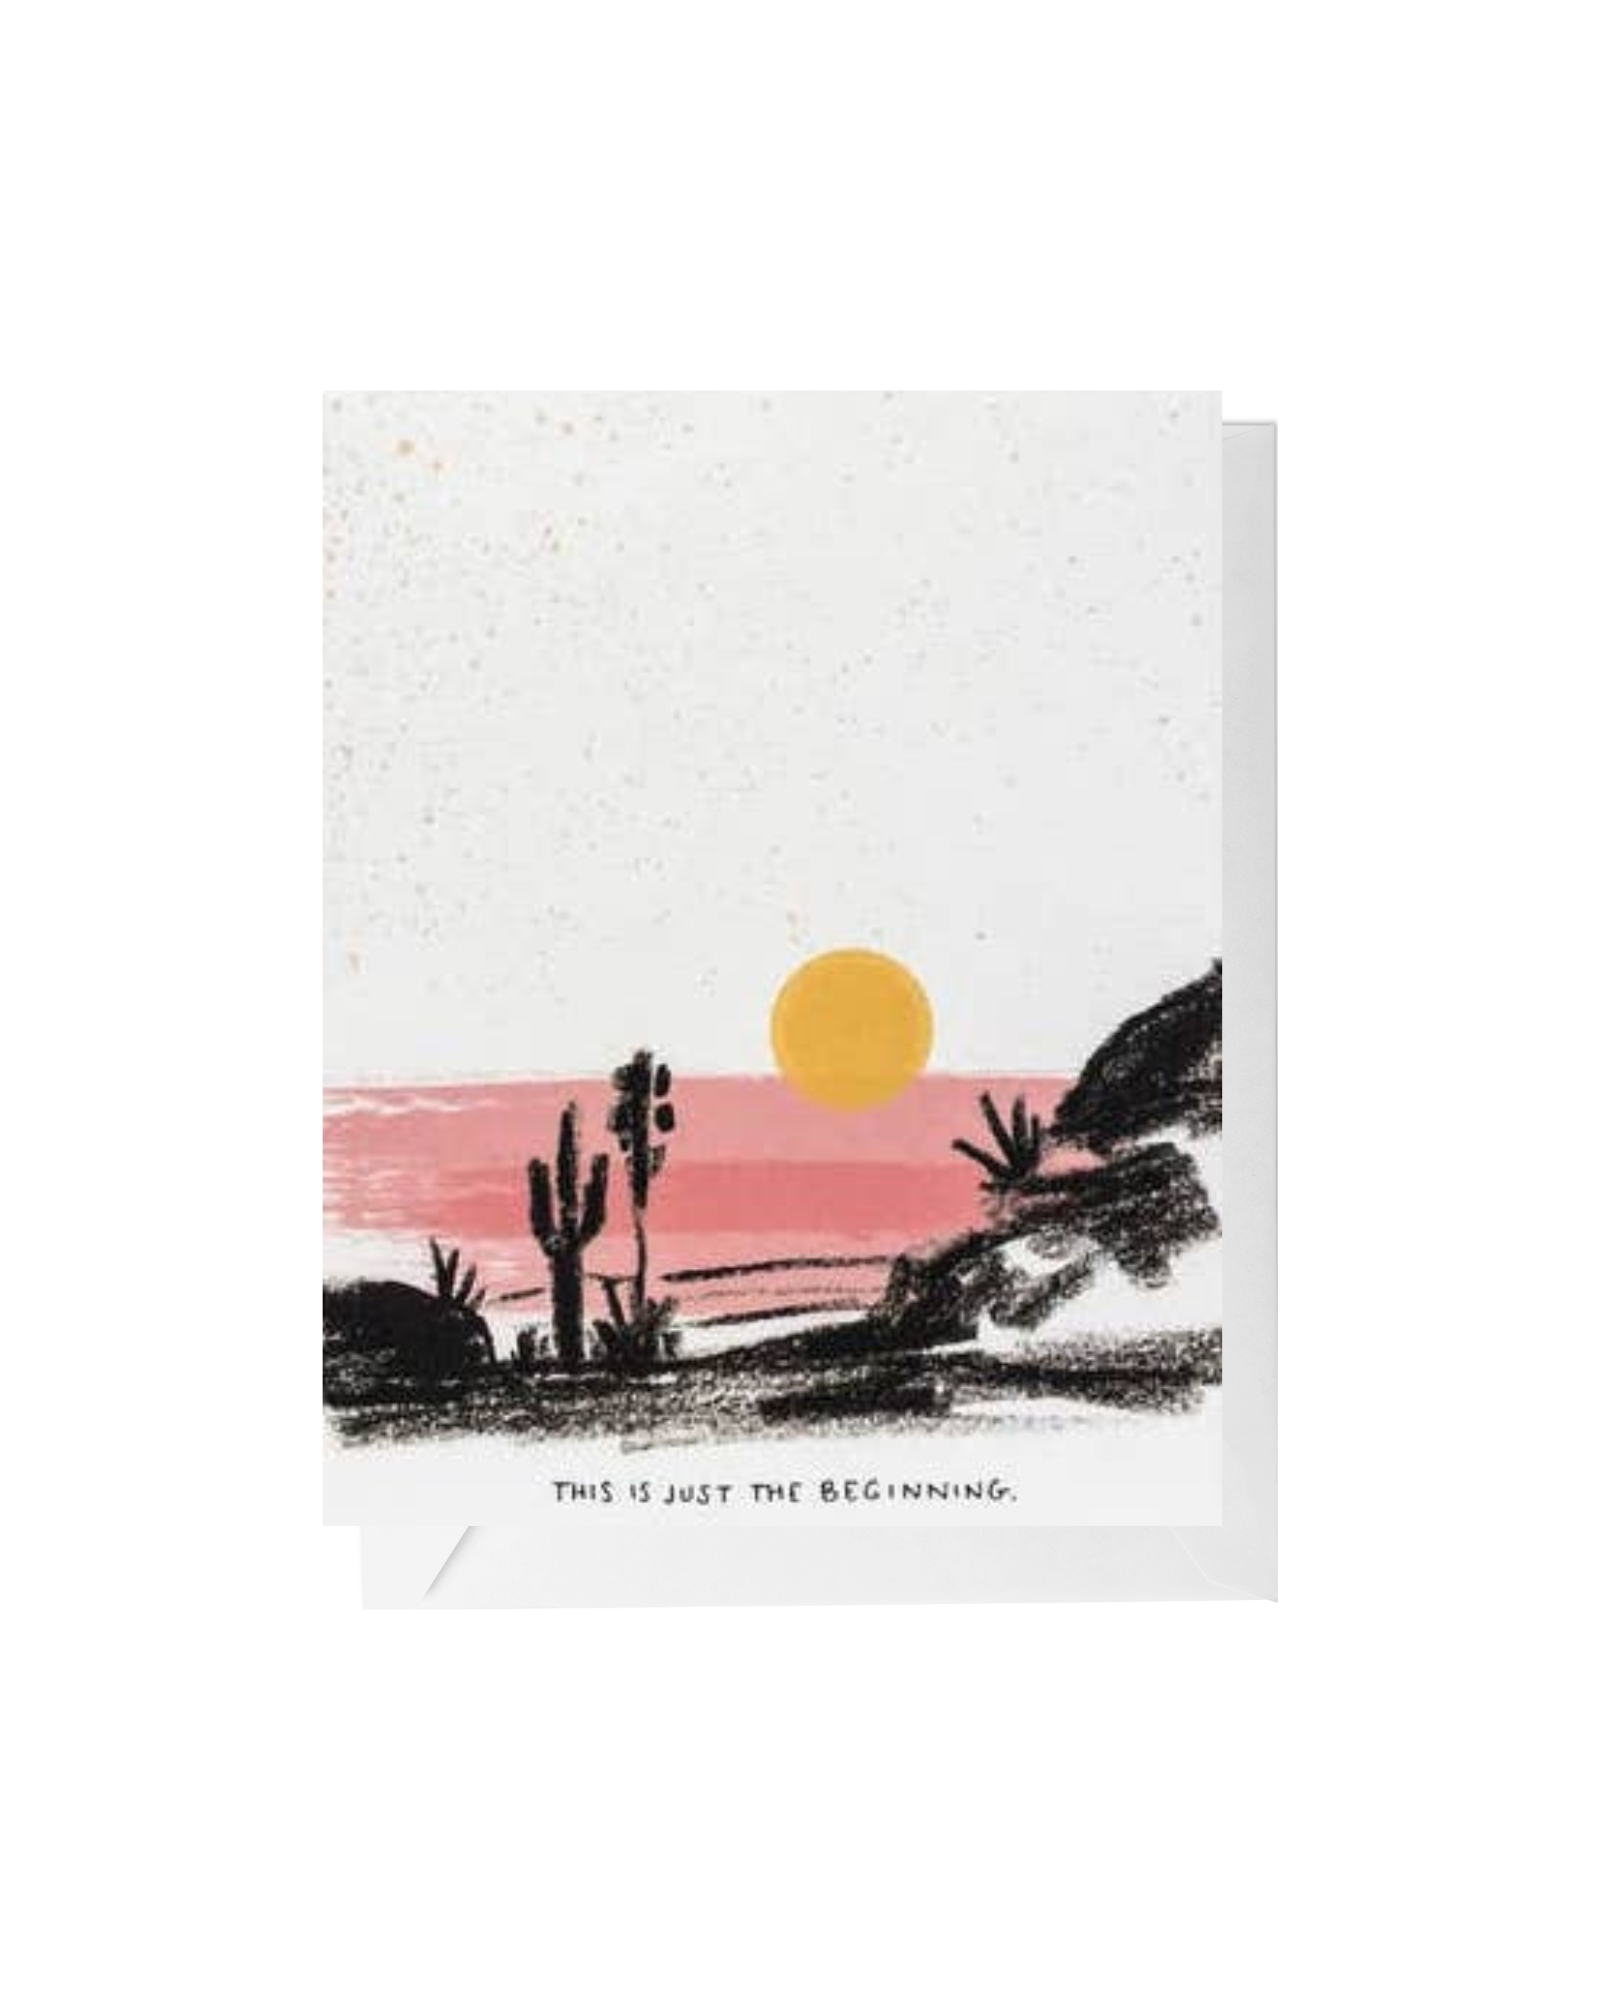 Greeting card with a charcoal desert sketch and the words "this is just the beginning" at the bottom center